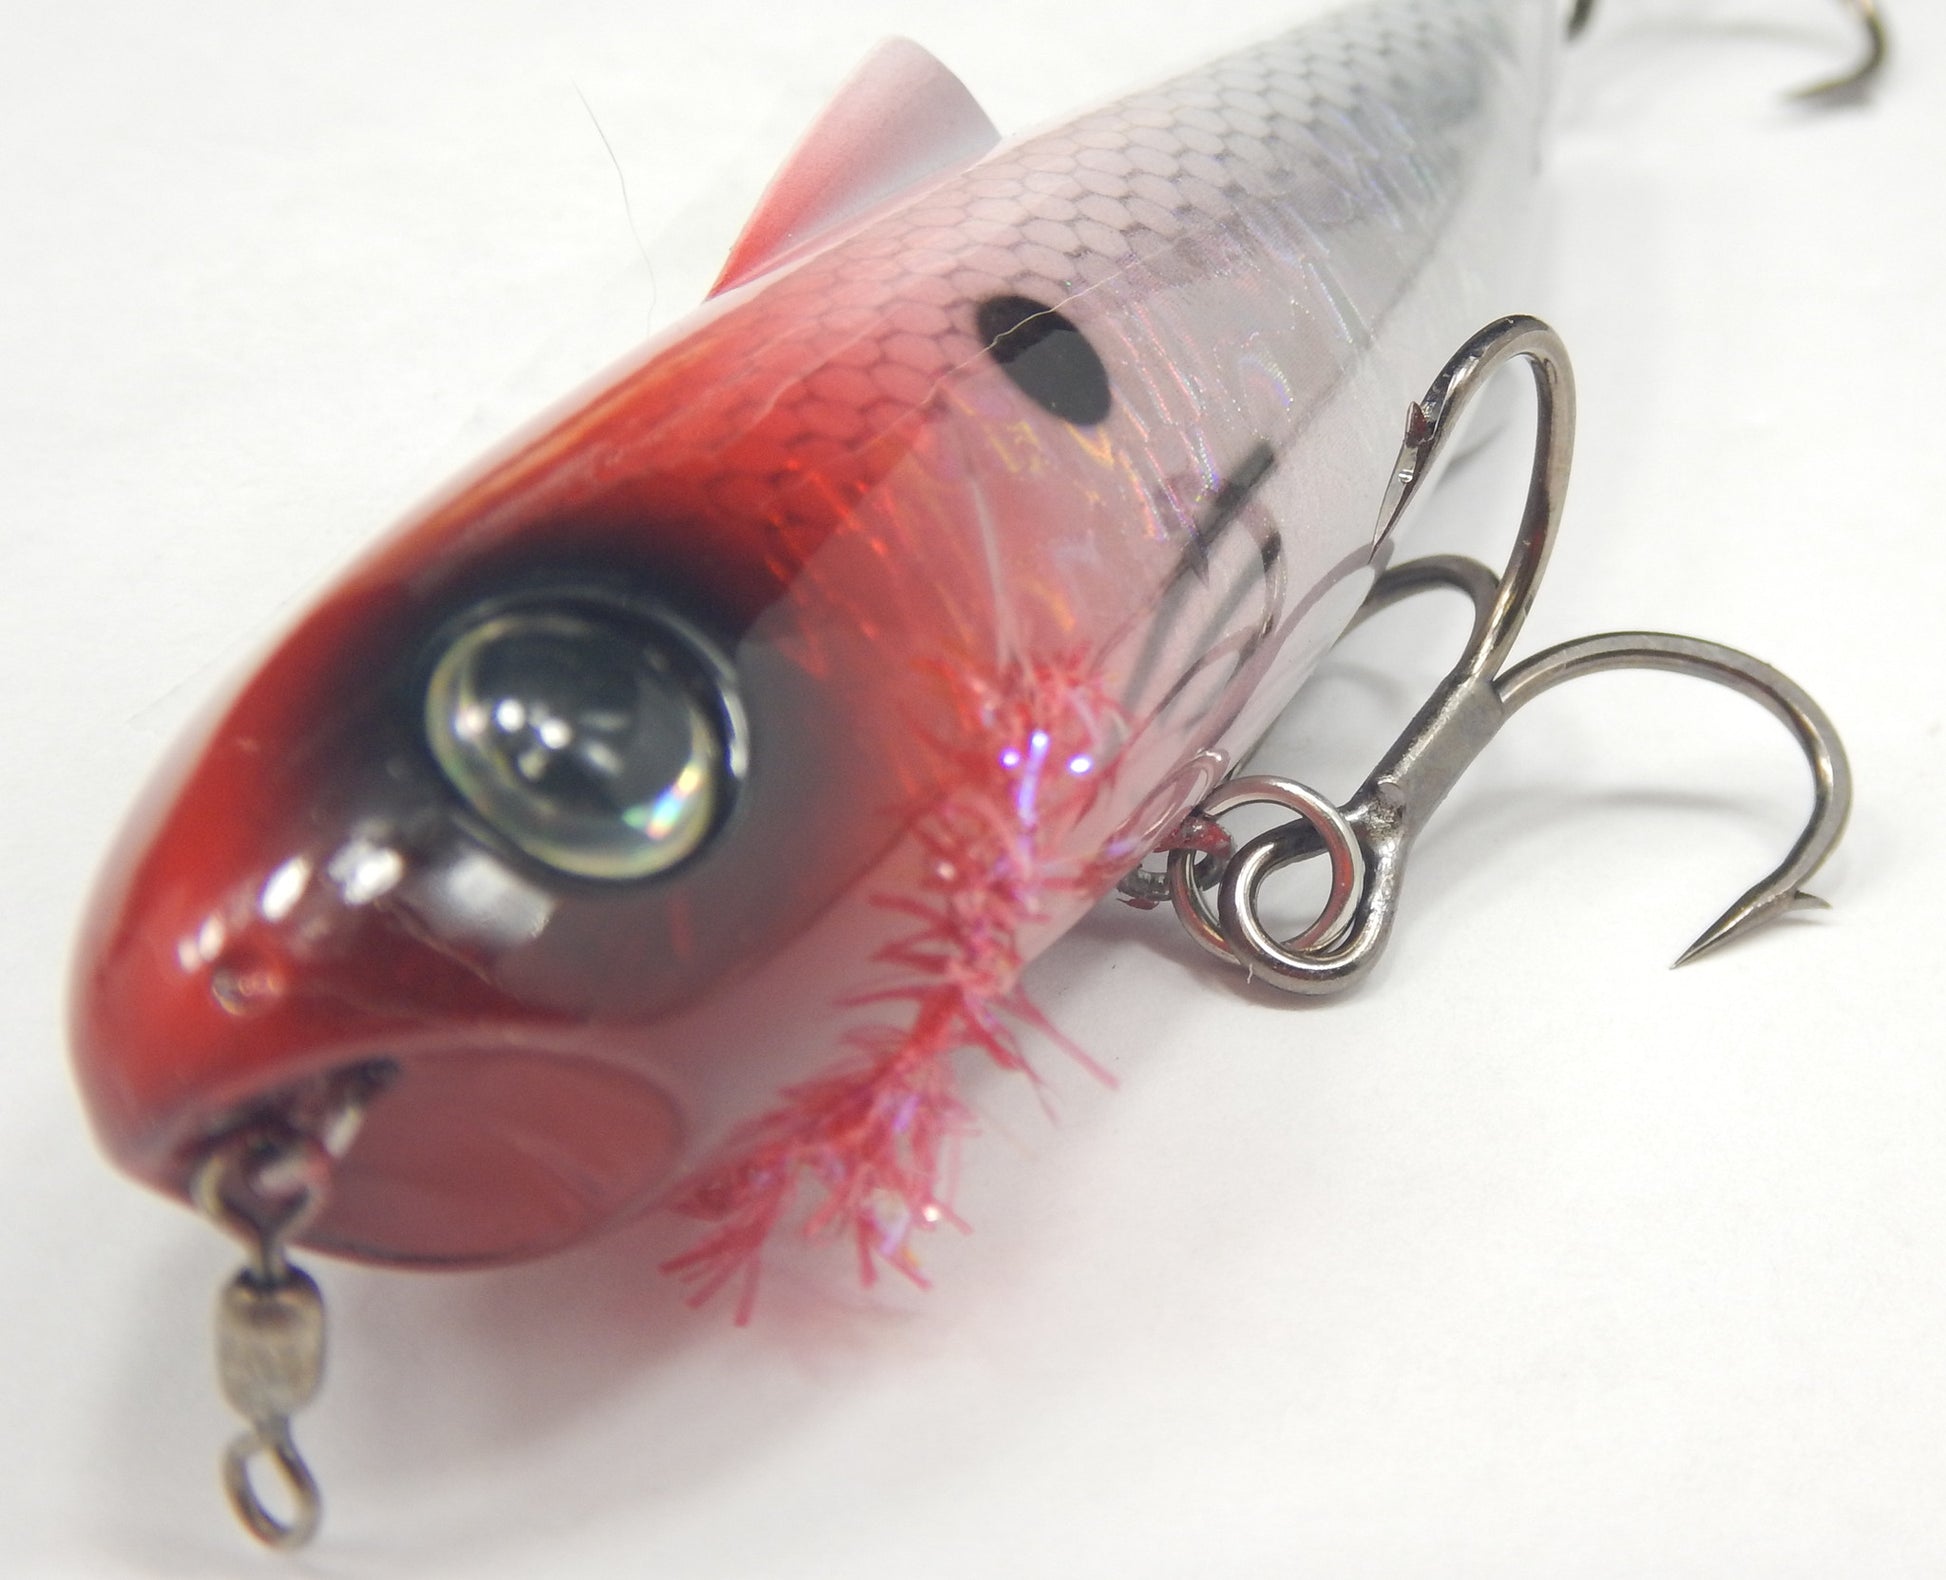 A List Lures, LLC. - Behold the Trump Topwater Bass fishing lure